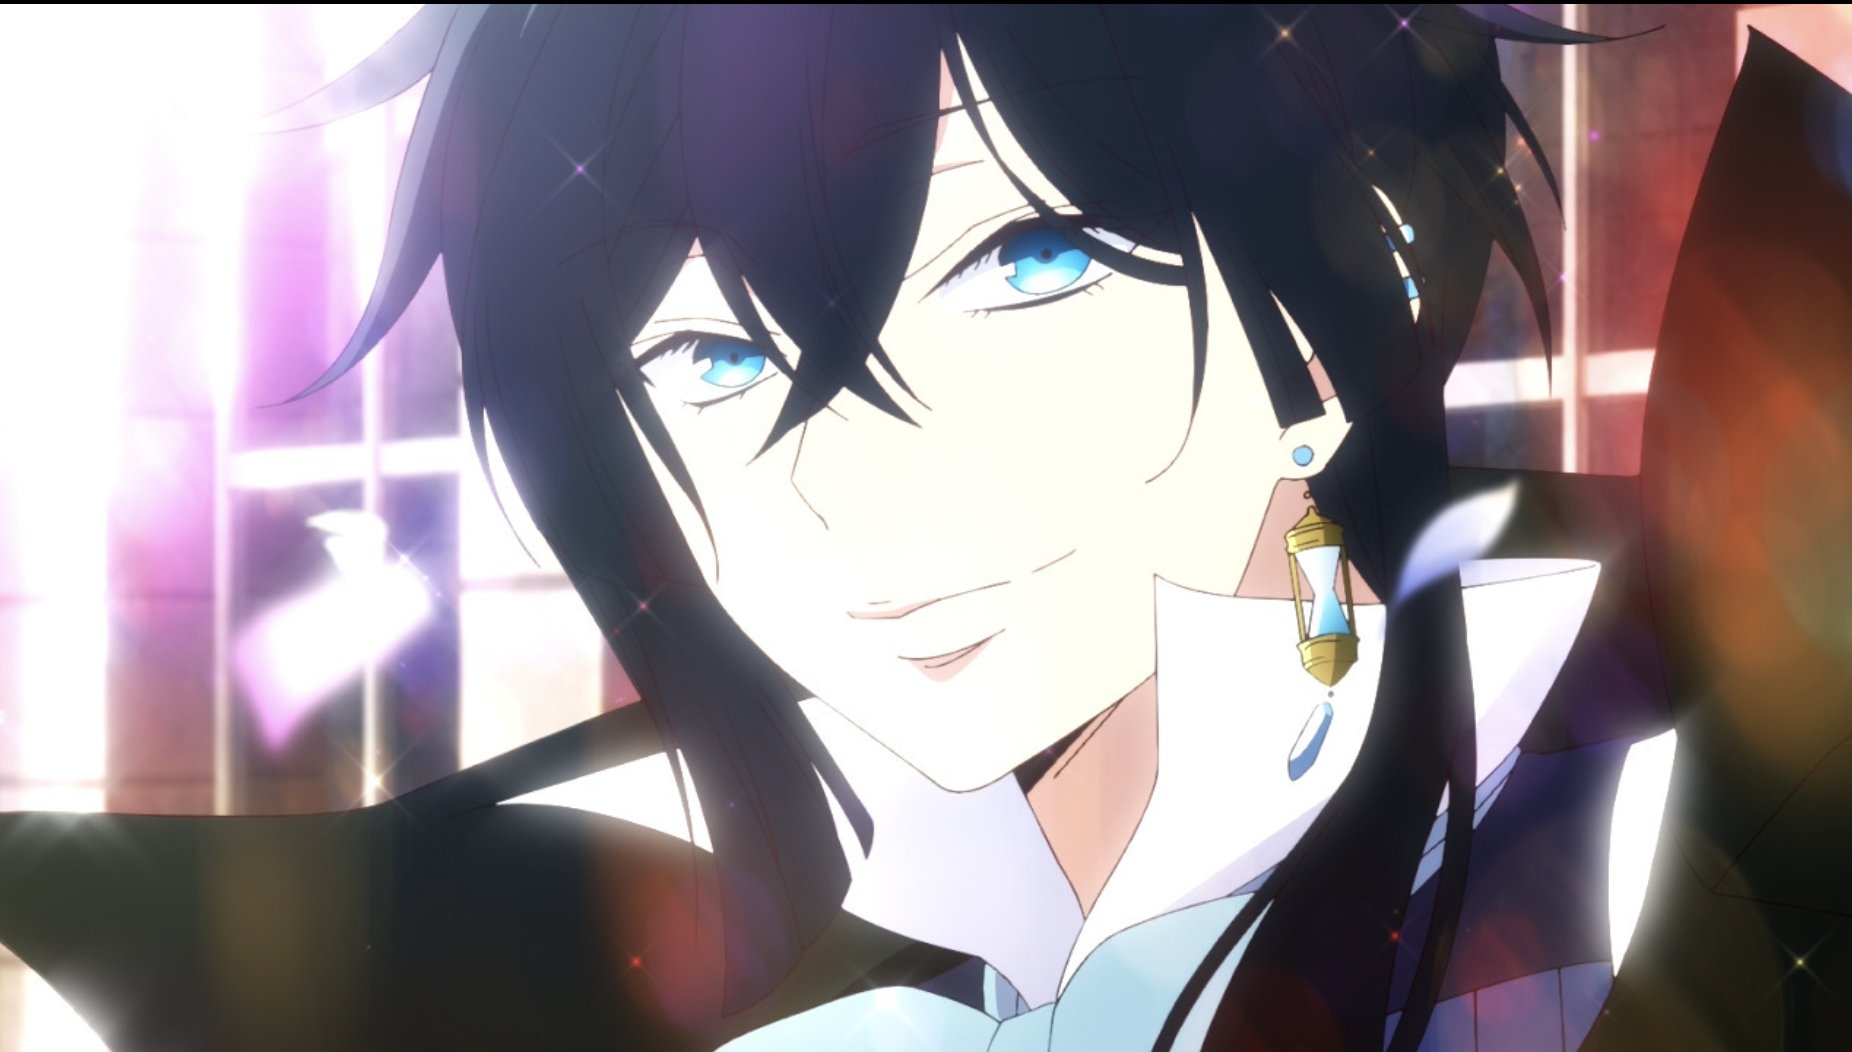 The Case Study of Vanitas Just the Two of Us - Watch on Crunchyroll